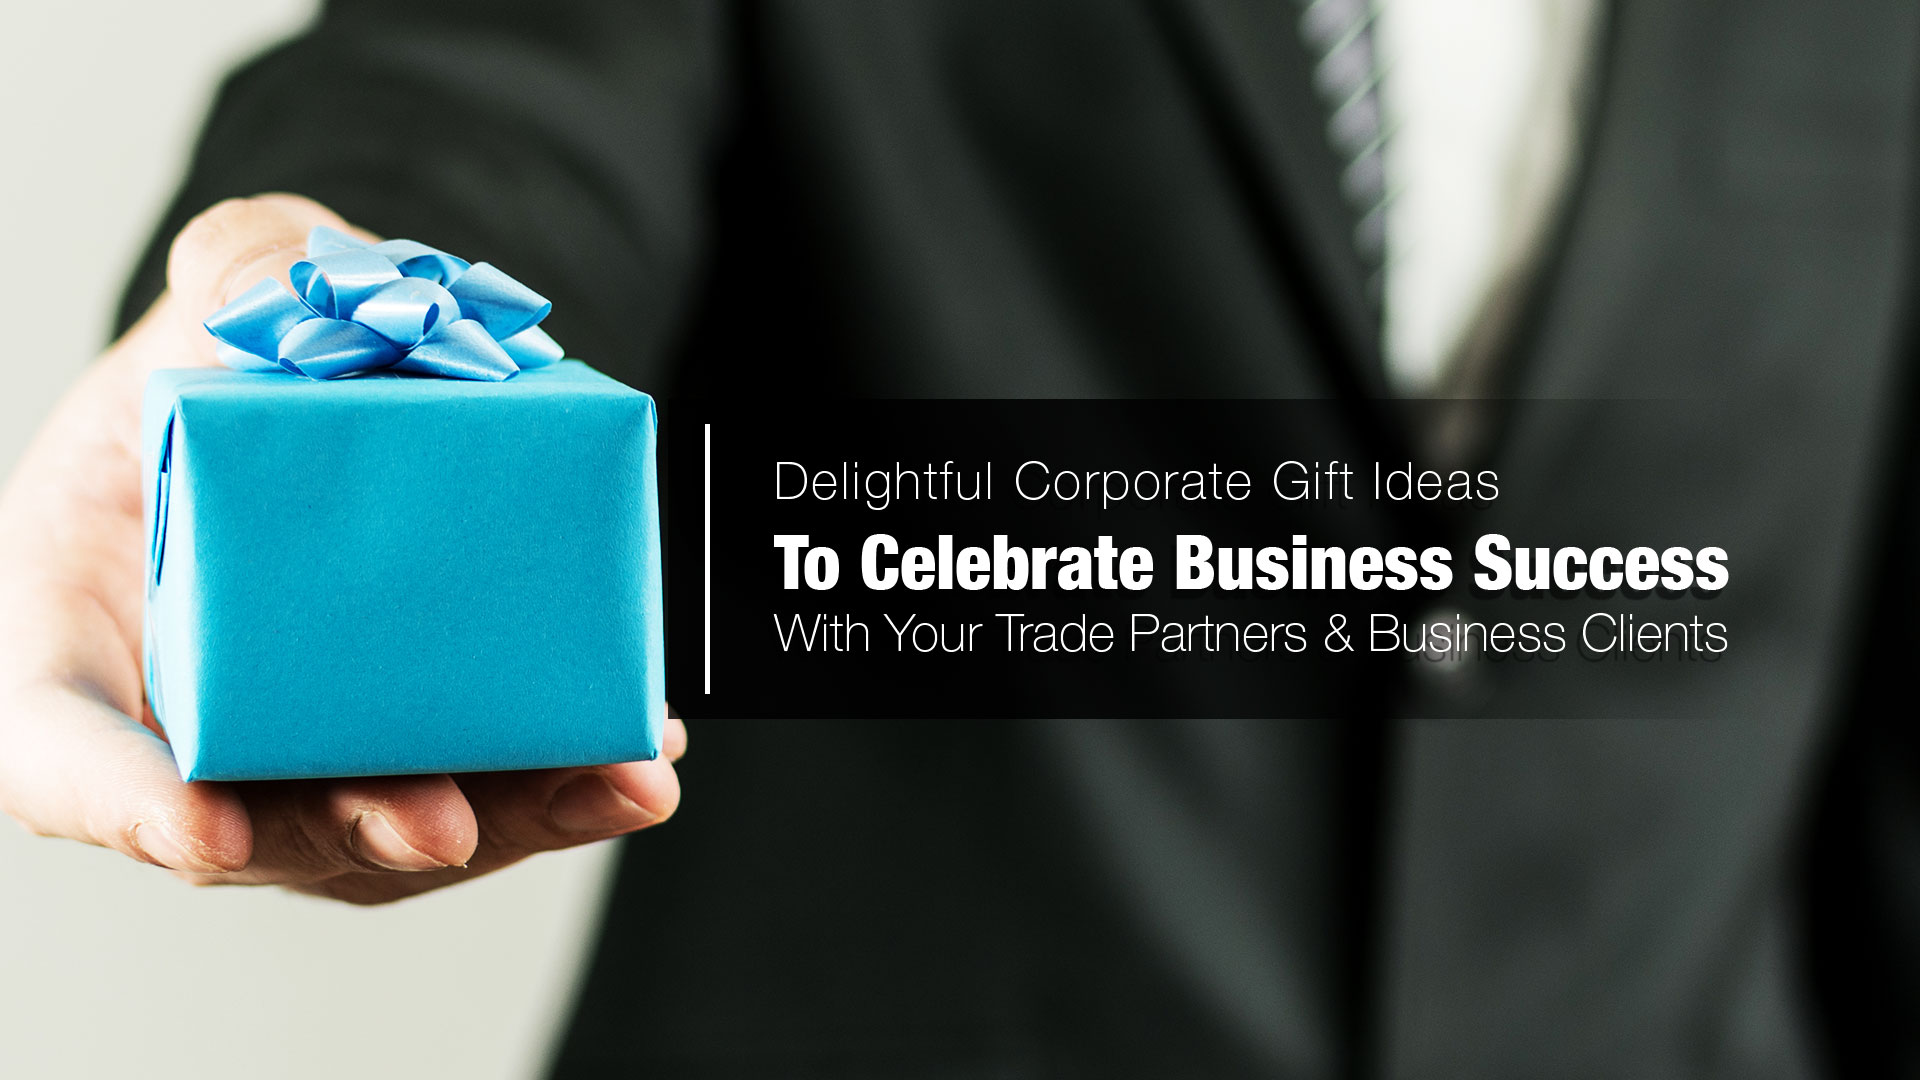 Celebrate Trade Partner Success with Corporate Gift